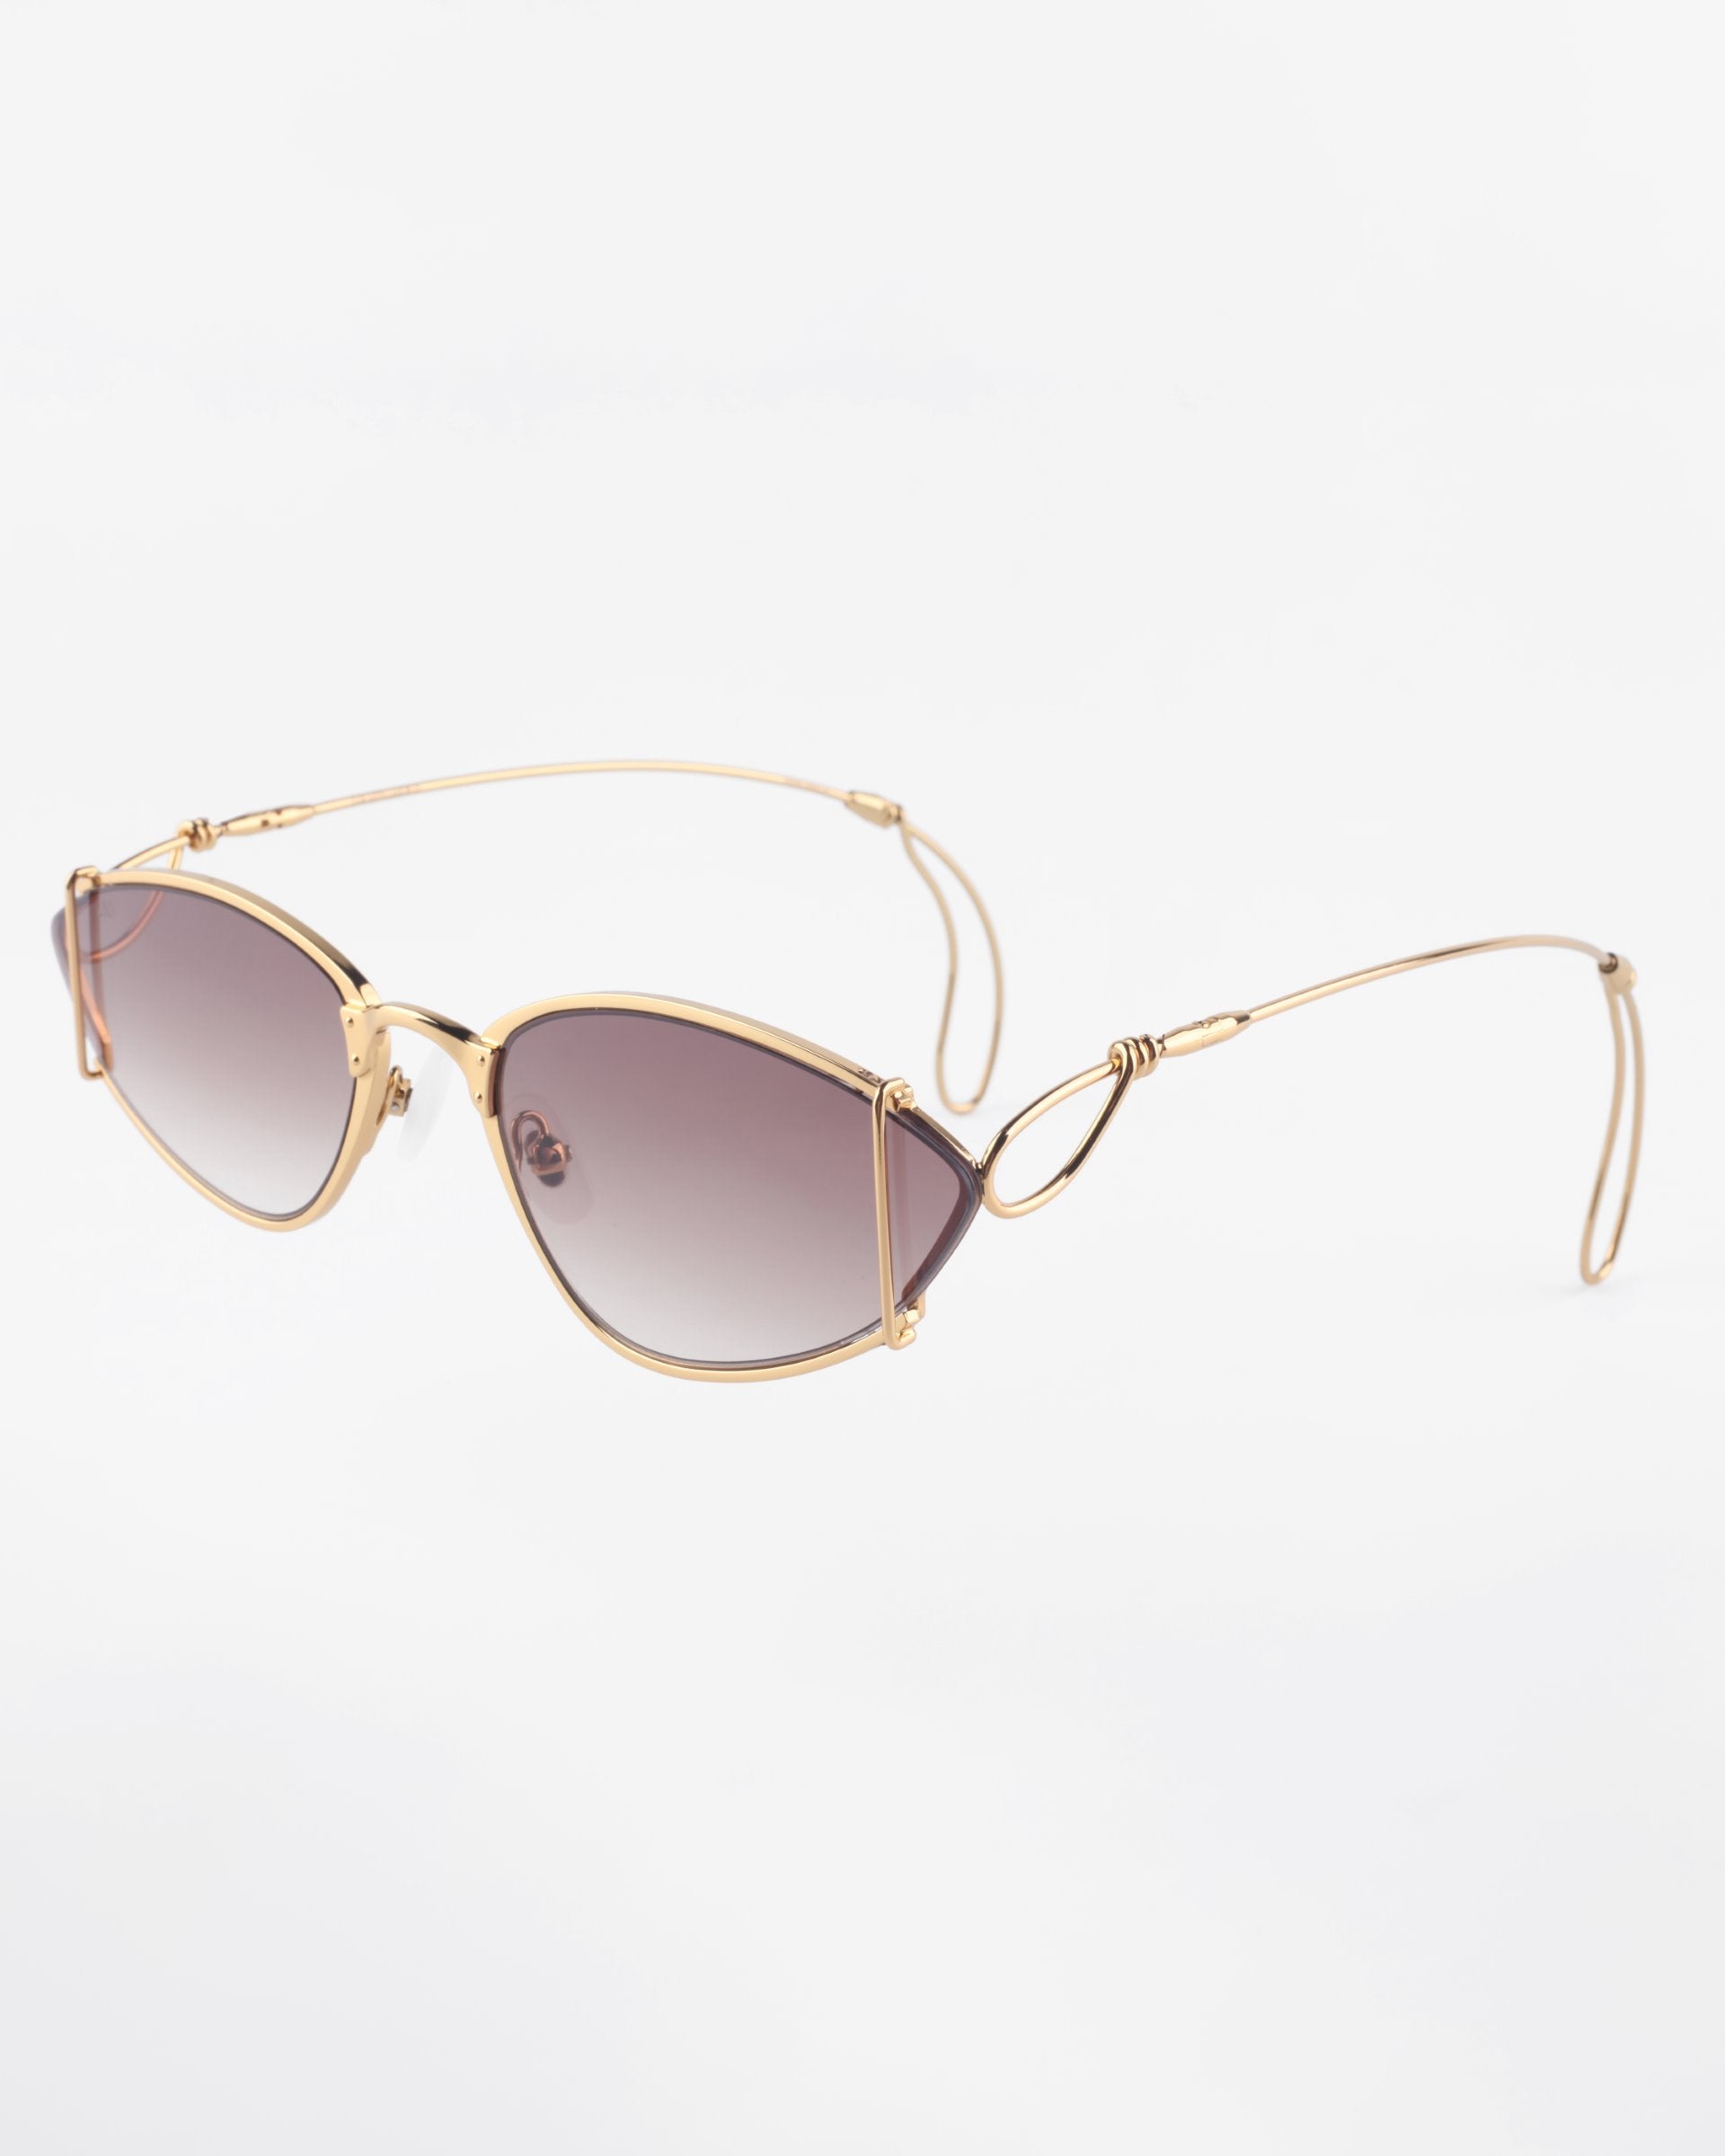 A pair of stylish For Art's Sake® Ornate sunglasses with thin, 18-karat gold-plated frames and an intricate double-bridge design. The ultra-lightweight Nylon lenses are tinted in a gradient from dark at the top to lighter at the bottom, offering 100% UVA & UVB protection. The temples have a sleek curve, ending in curved earpieces.